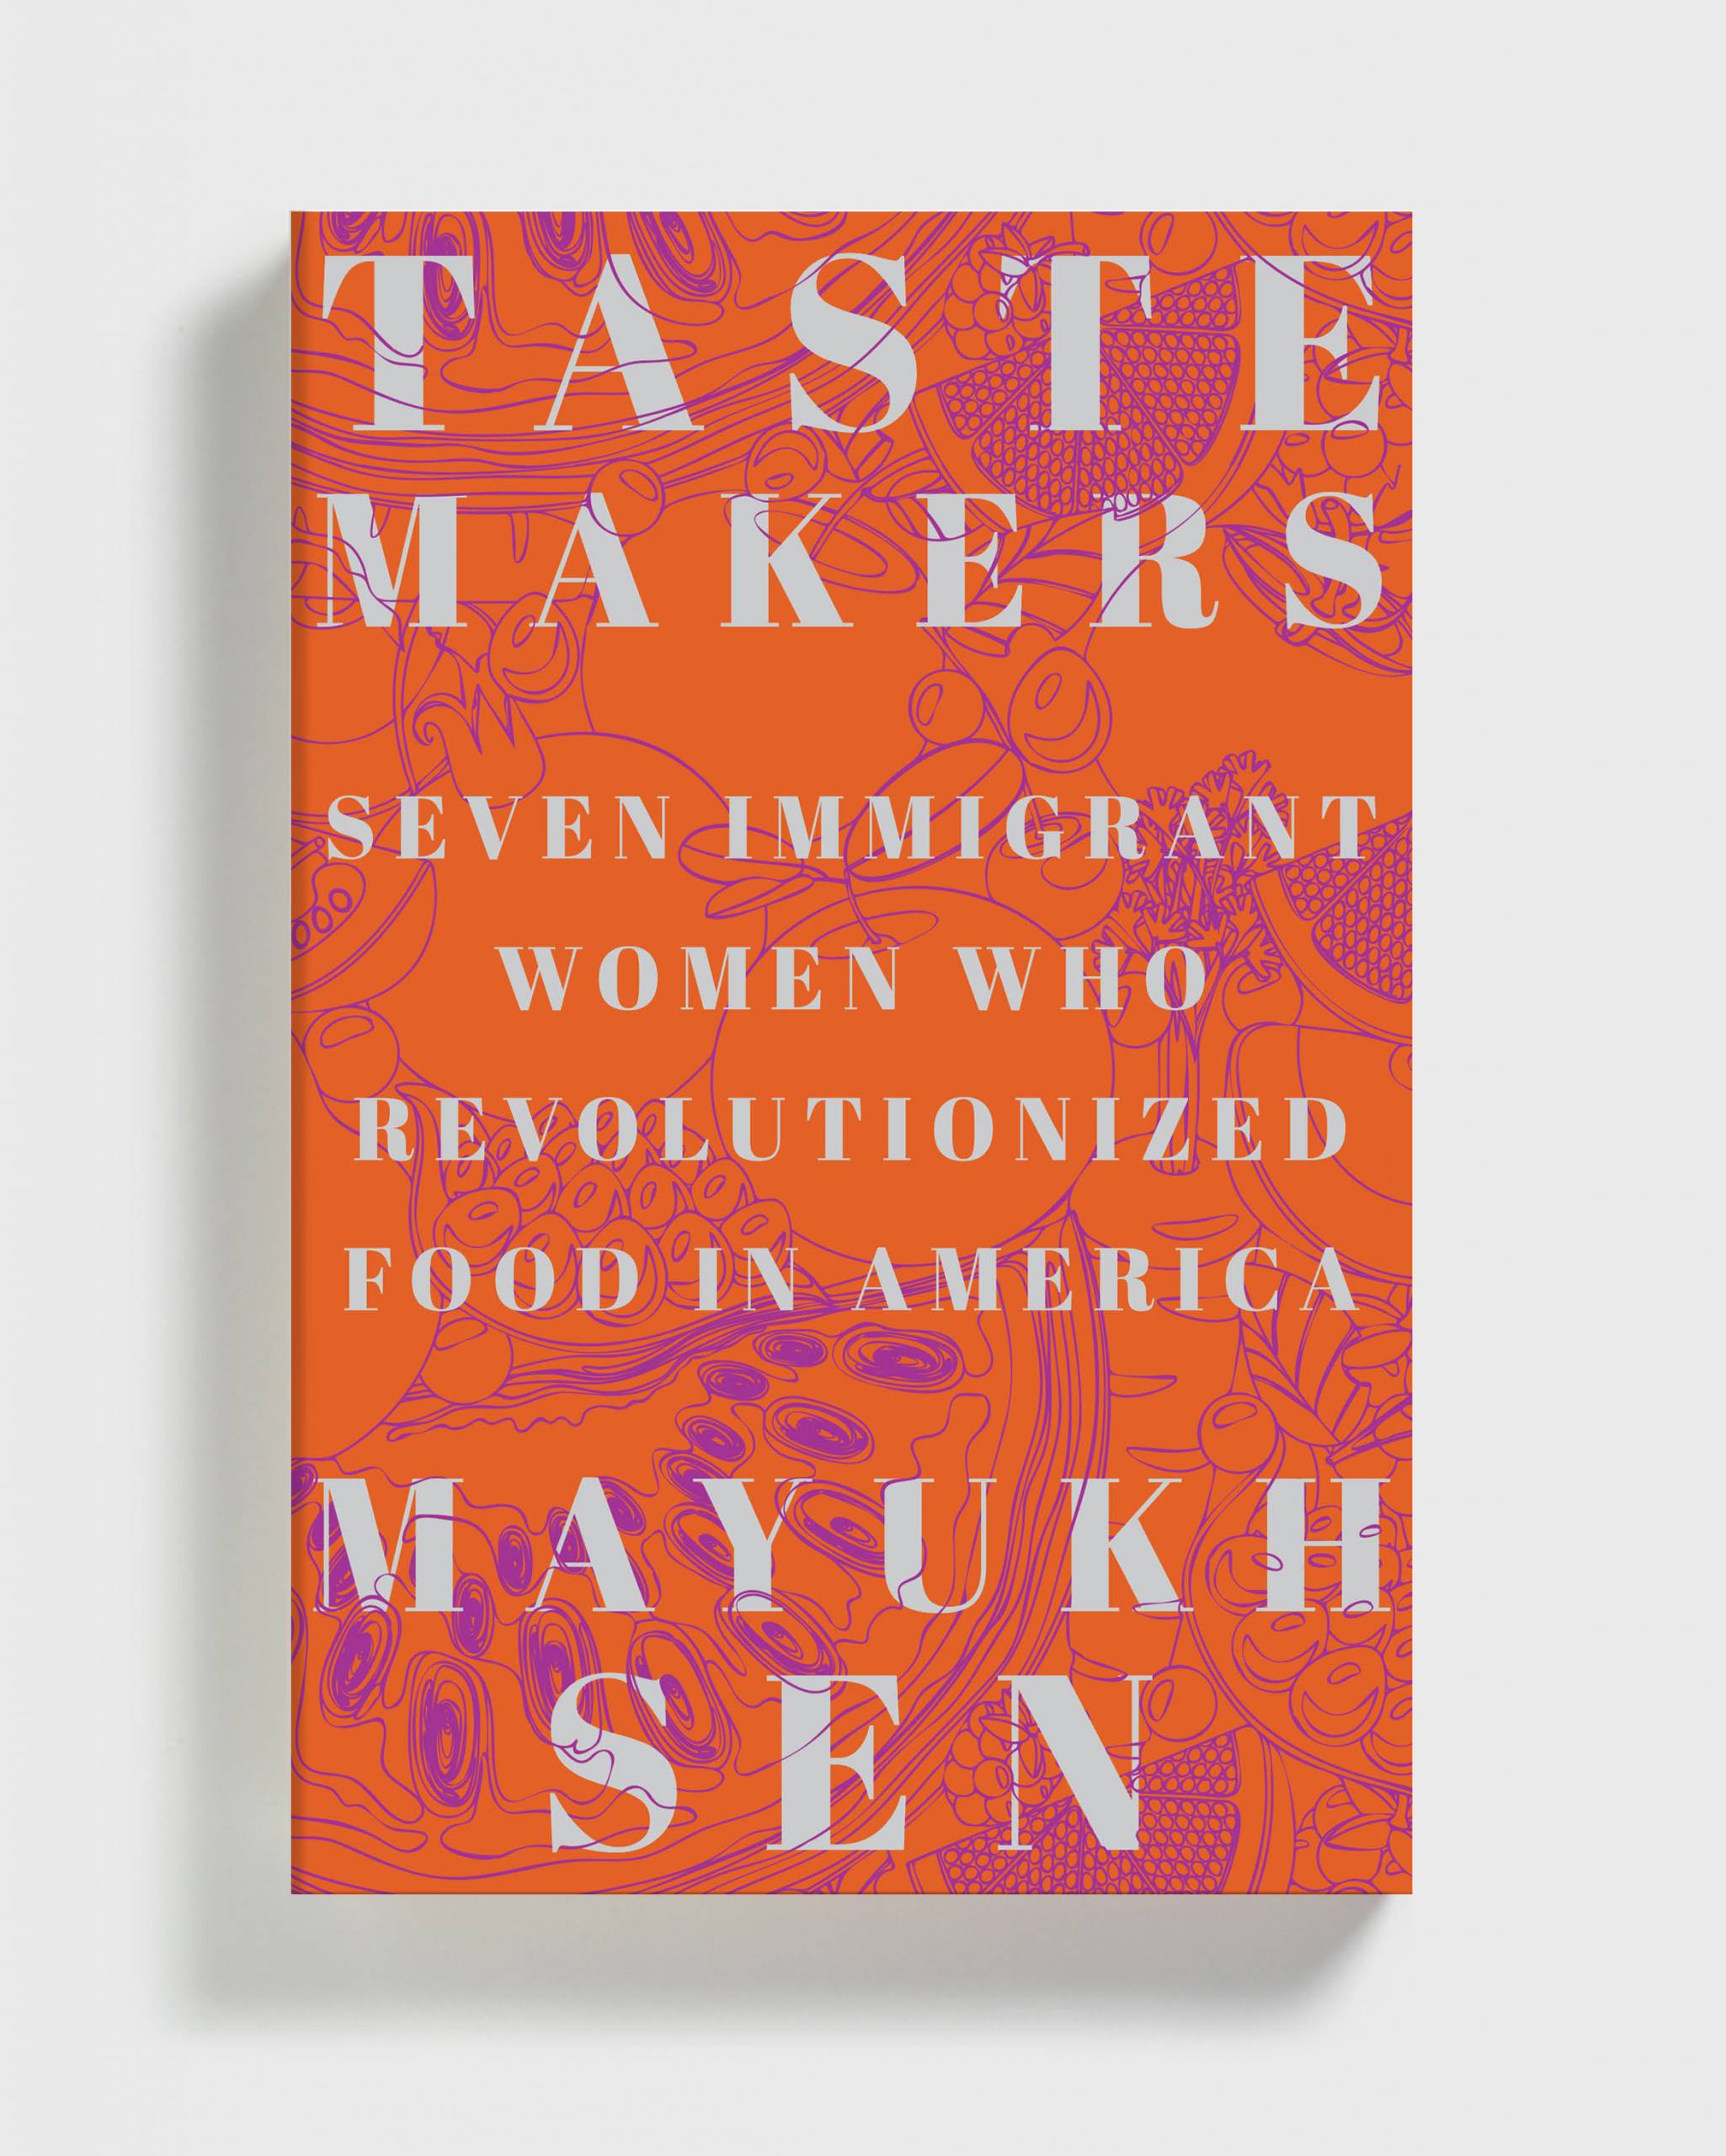 Orange book cover with white text: "Taste Makers: Seven Immigrant Women Wo Revolutionized Food in America"s